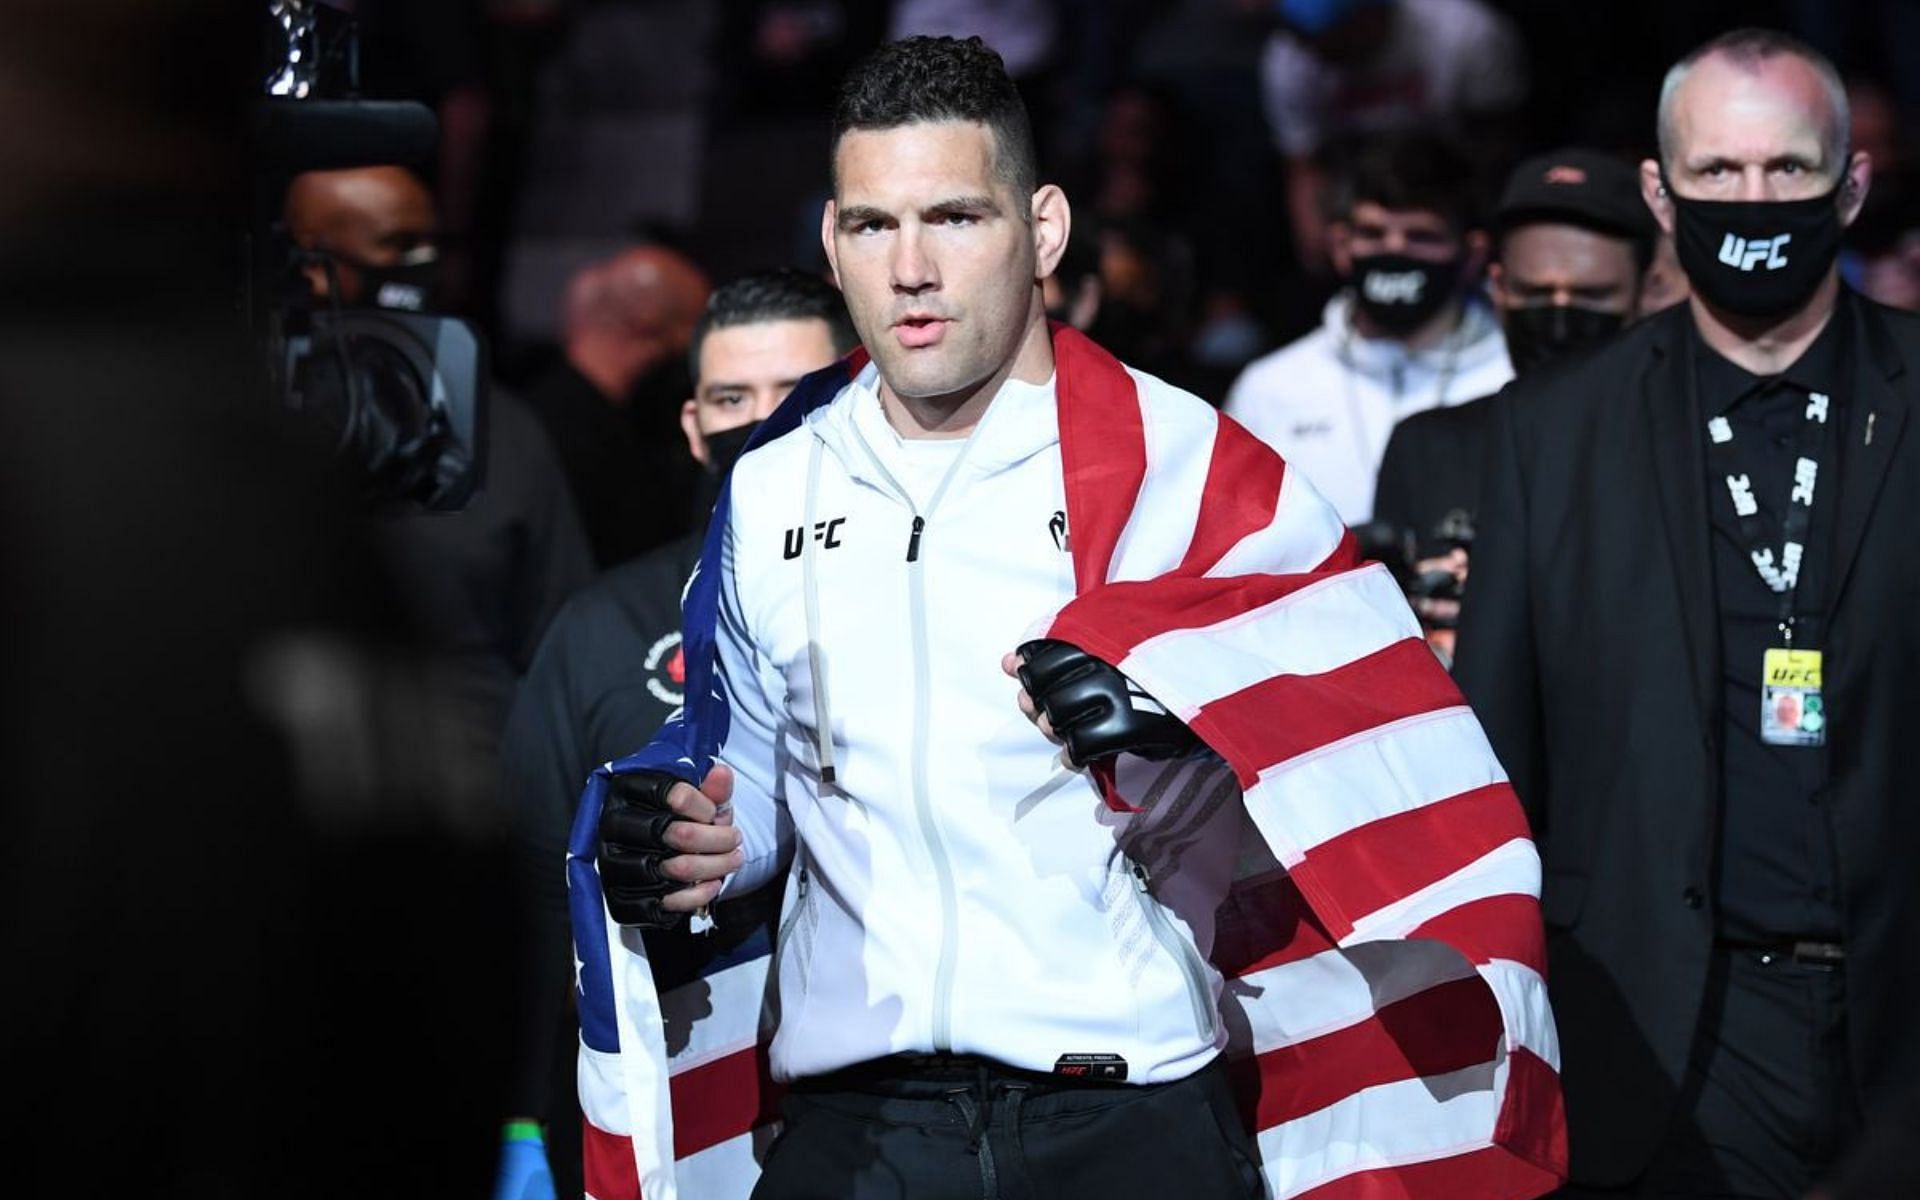 Chris Weidman has been involved in a number of memorable finishes over the years